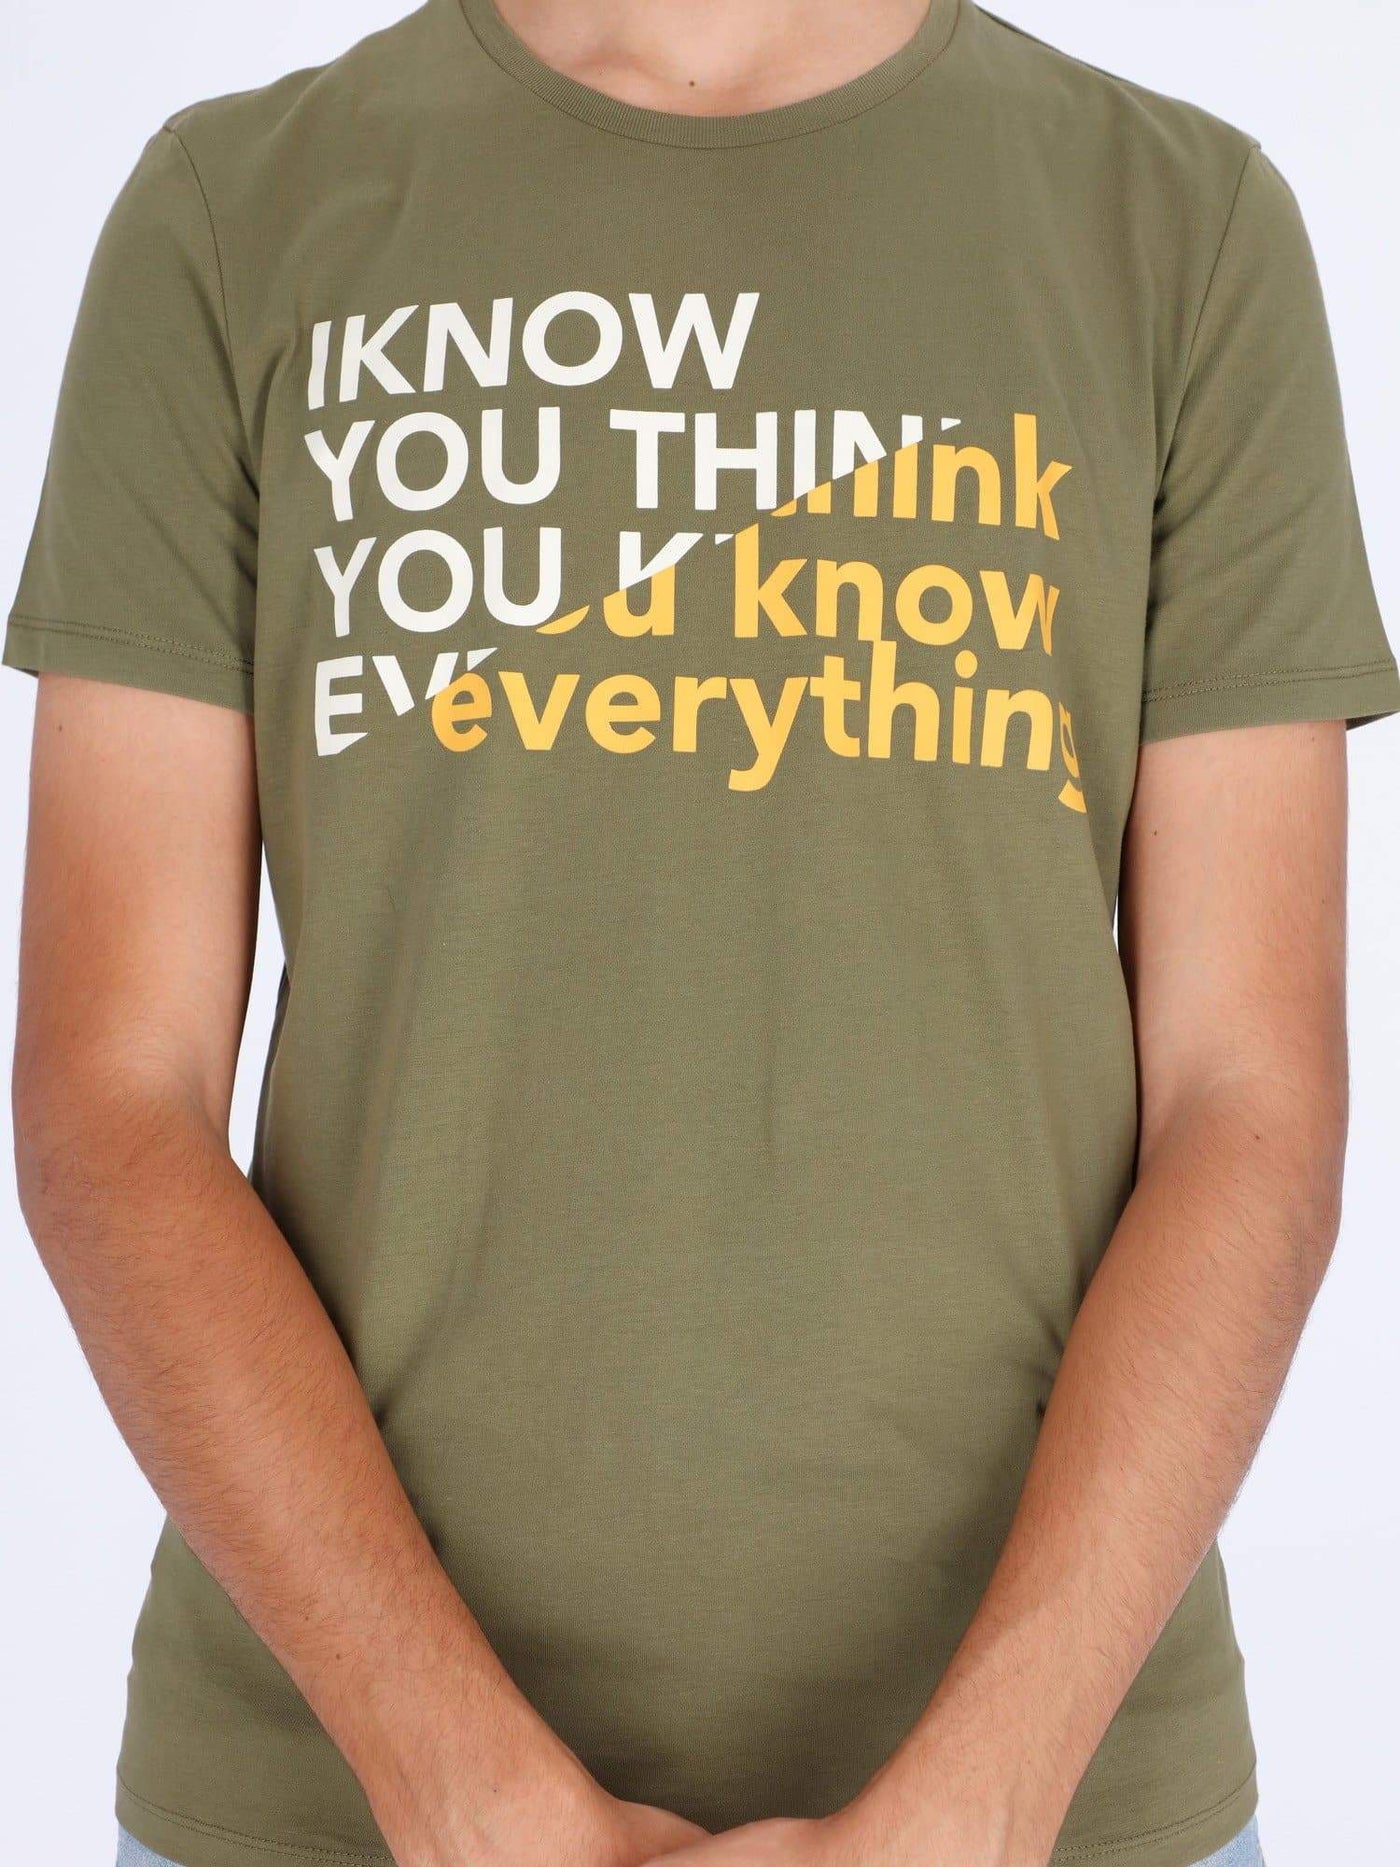 OR T-Shirts You Think You Know Everything Front Printed T-shirt